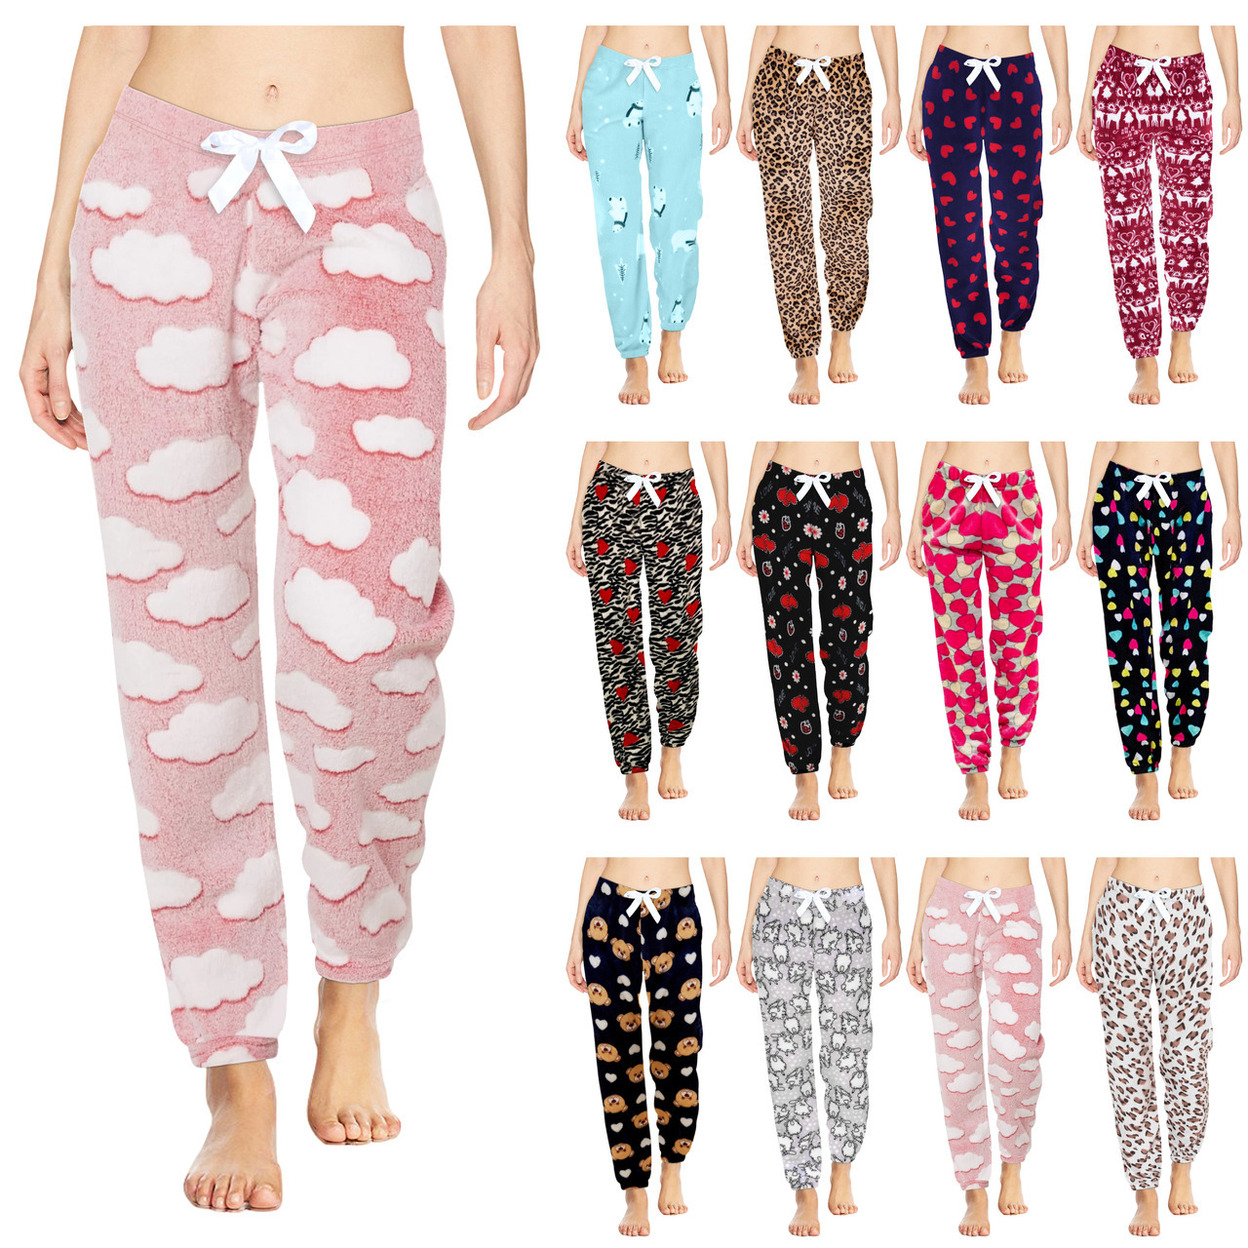 Multi-Pack: Women's Printed Ultra-Soft Comfy Stretch Micro-Fleece Pajama Lounge Pants - 1-pack, Animal, X-large